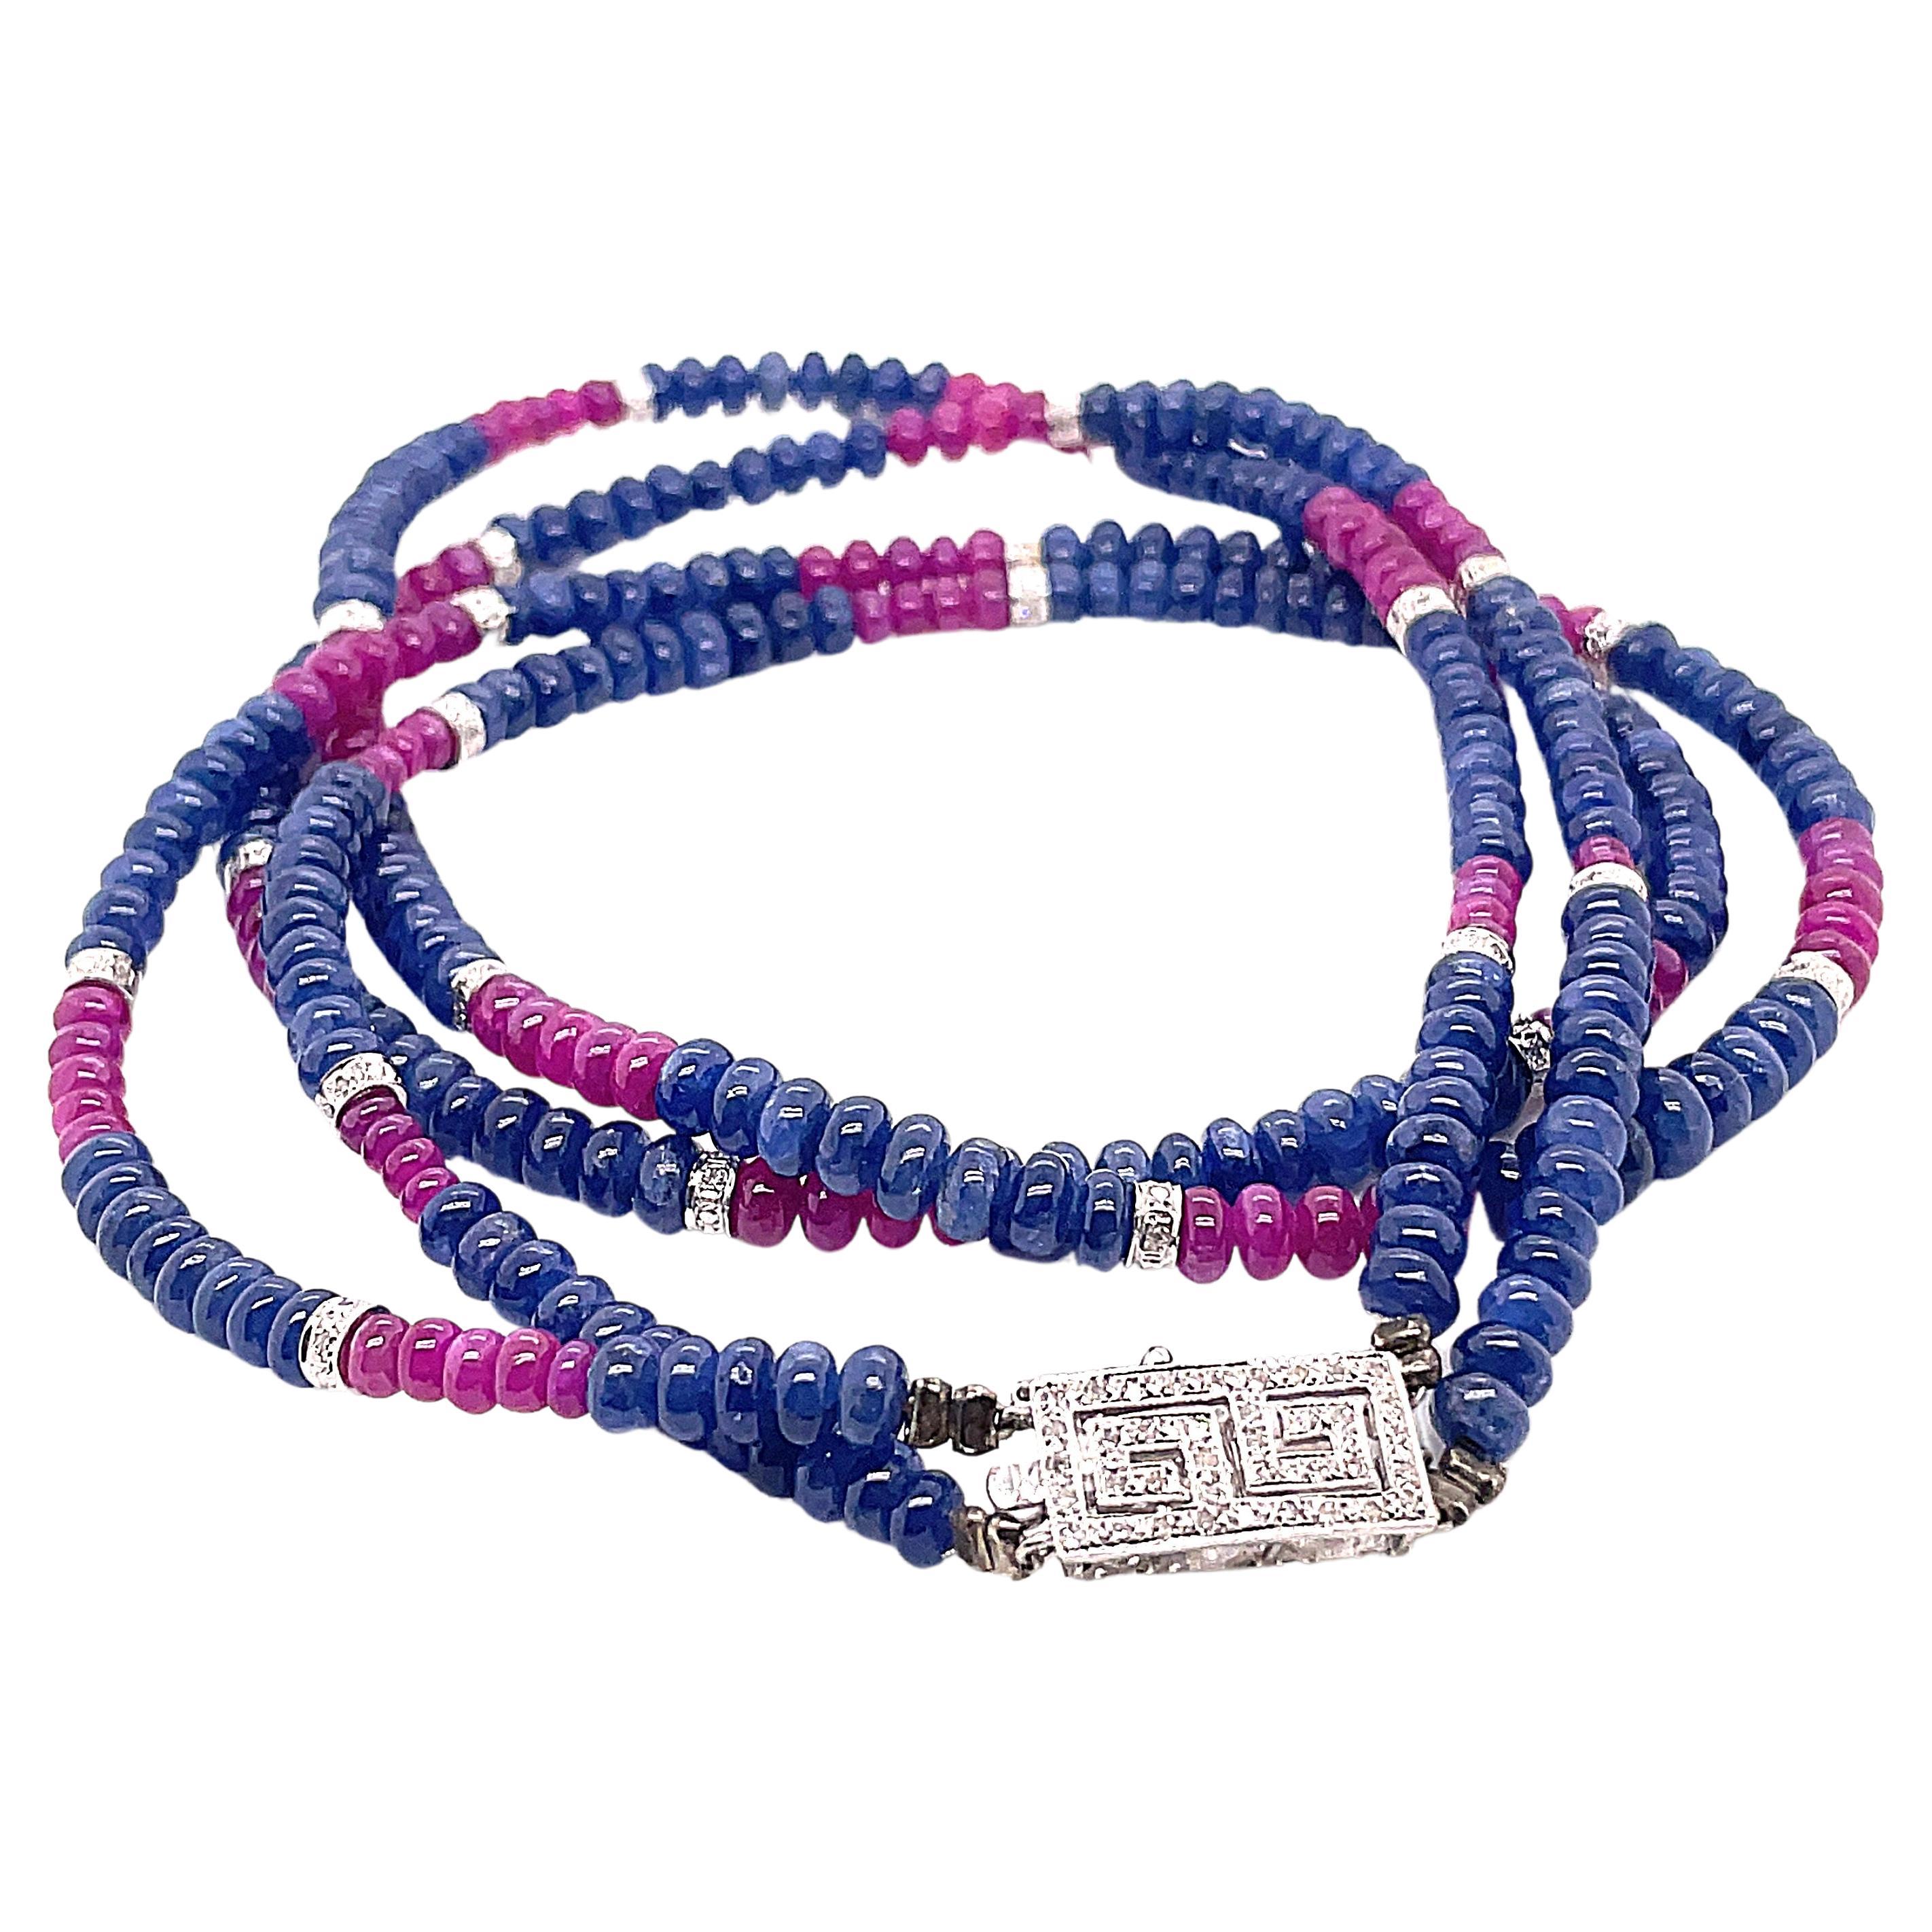 Burmese Ruby and Sapphire Beads White Diamond Gold Necklace For Sale